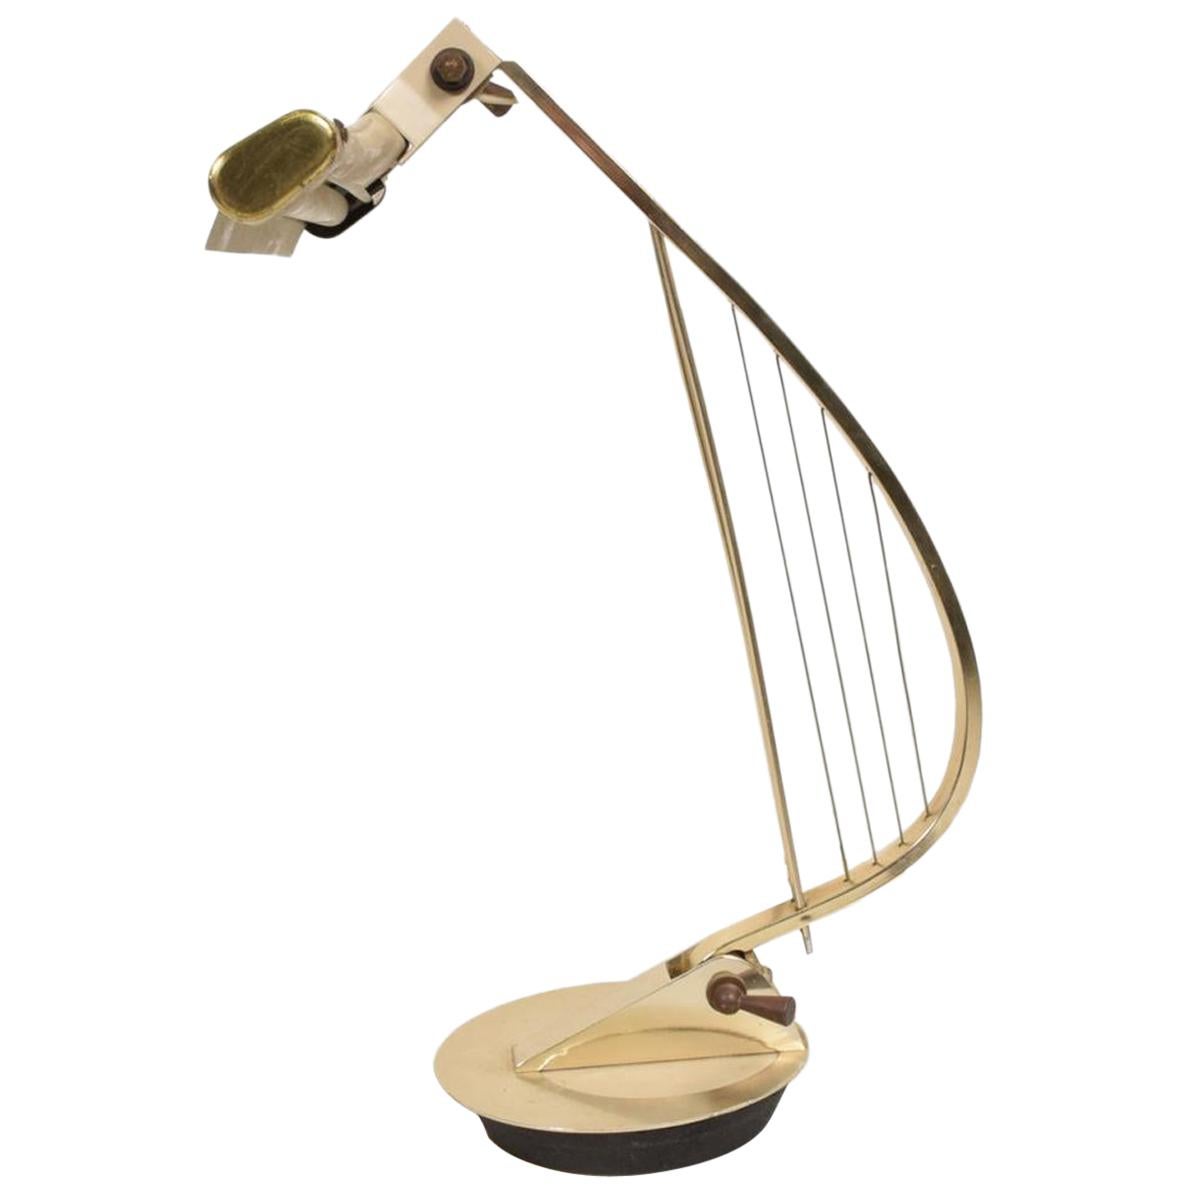 Desk Lamp
Mid Century Modern Brass Table Desk Task Lamp in a sculptural harp shape.
Made in the USA circa the 1960s. Metal Brass and Aluminum. Style of Lightolier.
Dimensions: 15H x 9.5 D x 12W.
Original vintage unrestored condition. Minor scuffs